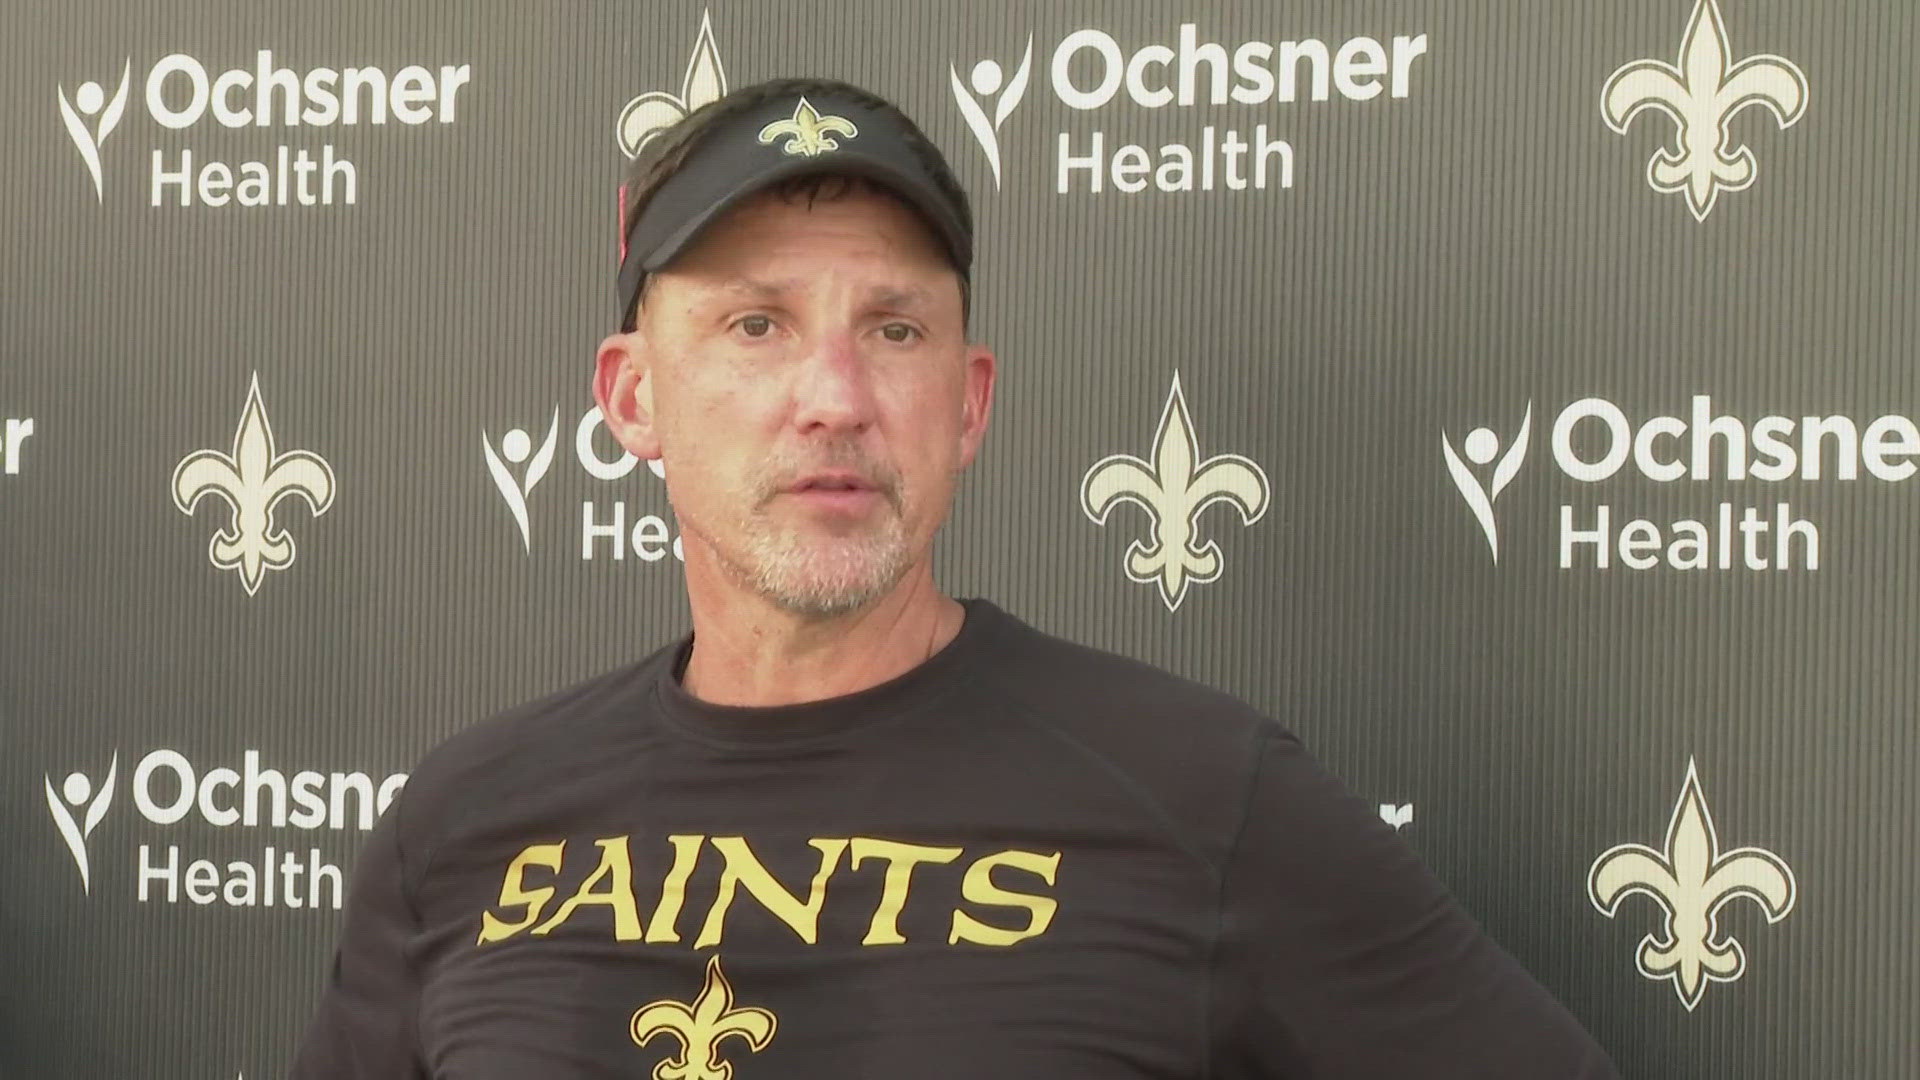 The Saints hit the practice field on Tuesday for the first time with veterans and rookies for the first of 10 OTA workouts at the practice facility in Metairie, La.